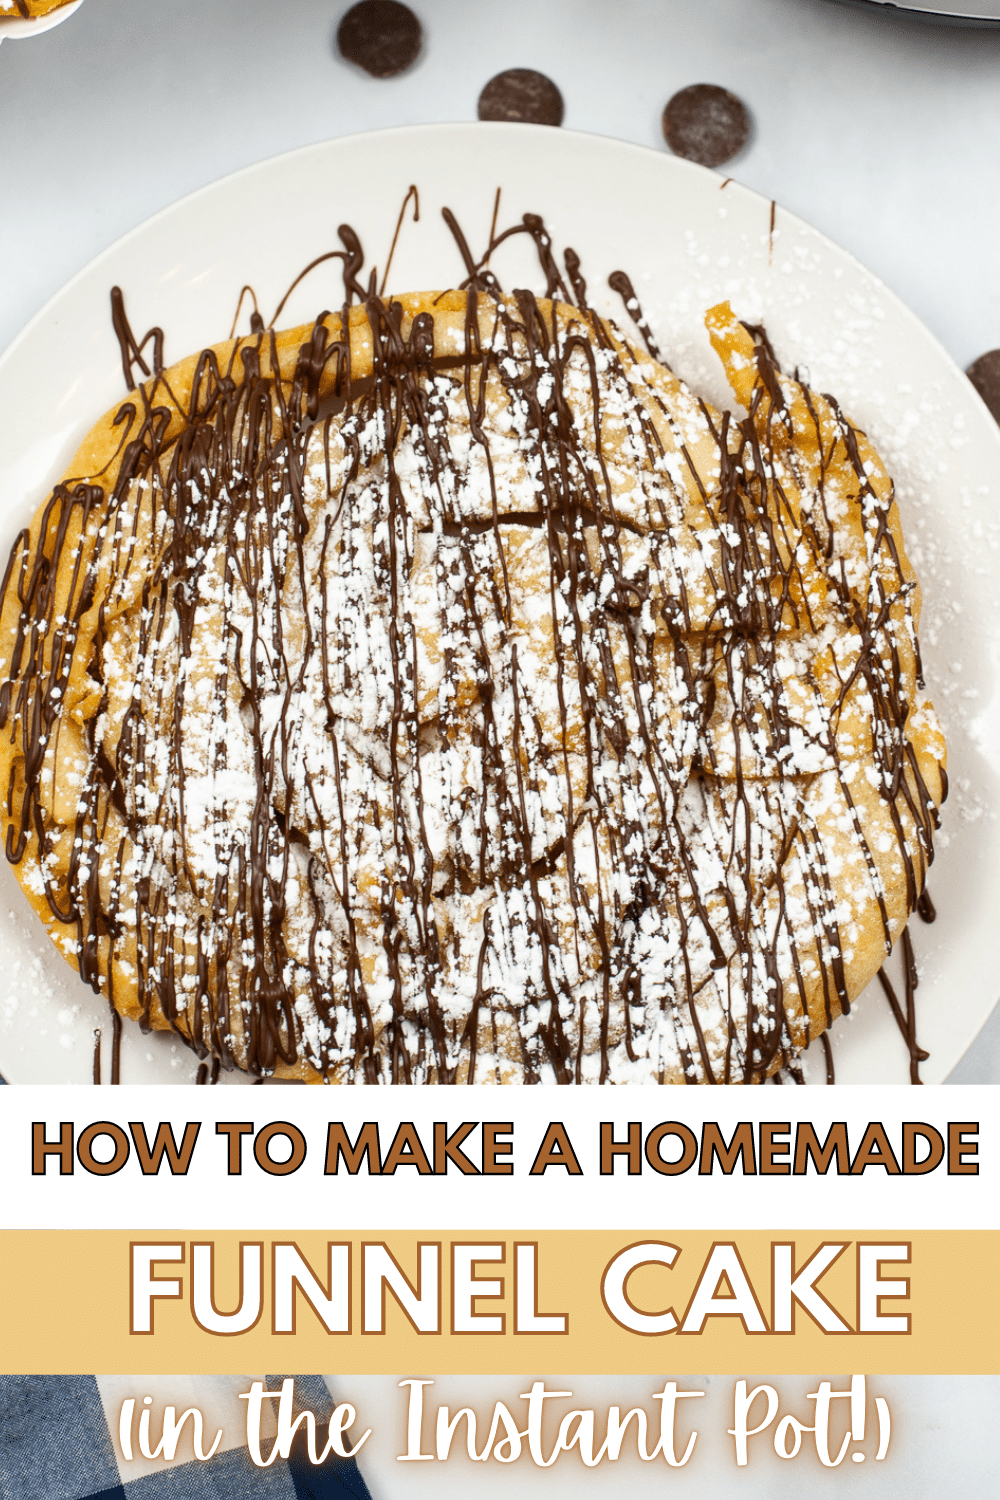 Have you ever had a craving for funnel cake but didn’t have a carnival nearby? Here's how to make a homemade funnel cake in the Instant Pot. #funnelcake #homemade #instantpot #pressurecooker #dessert via @wondermomwannab